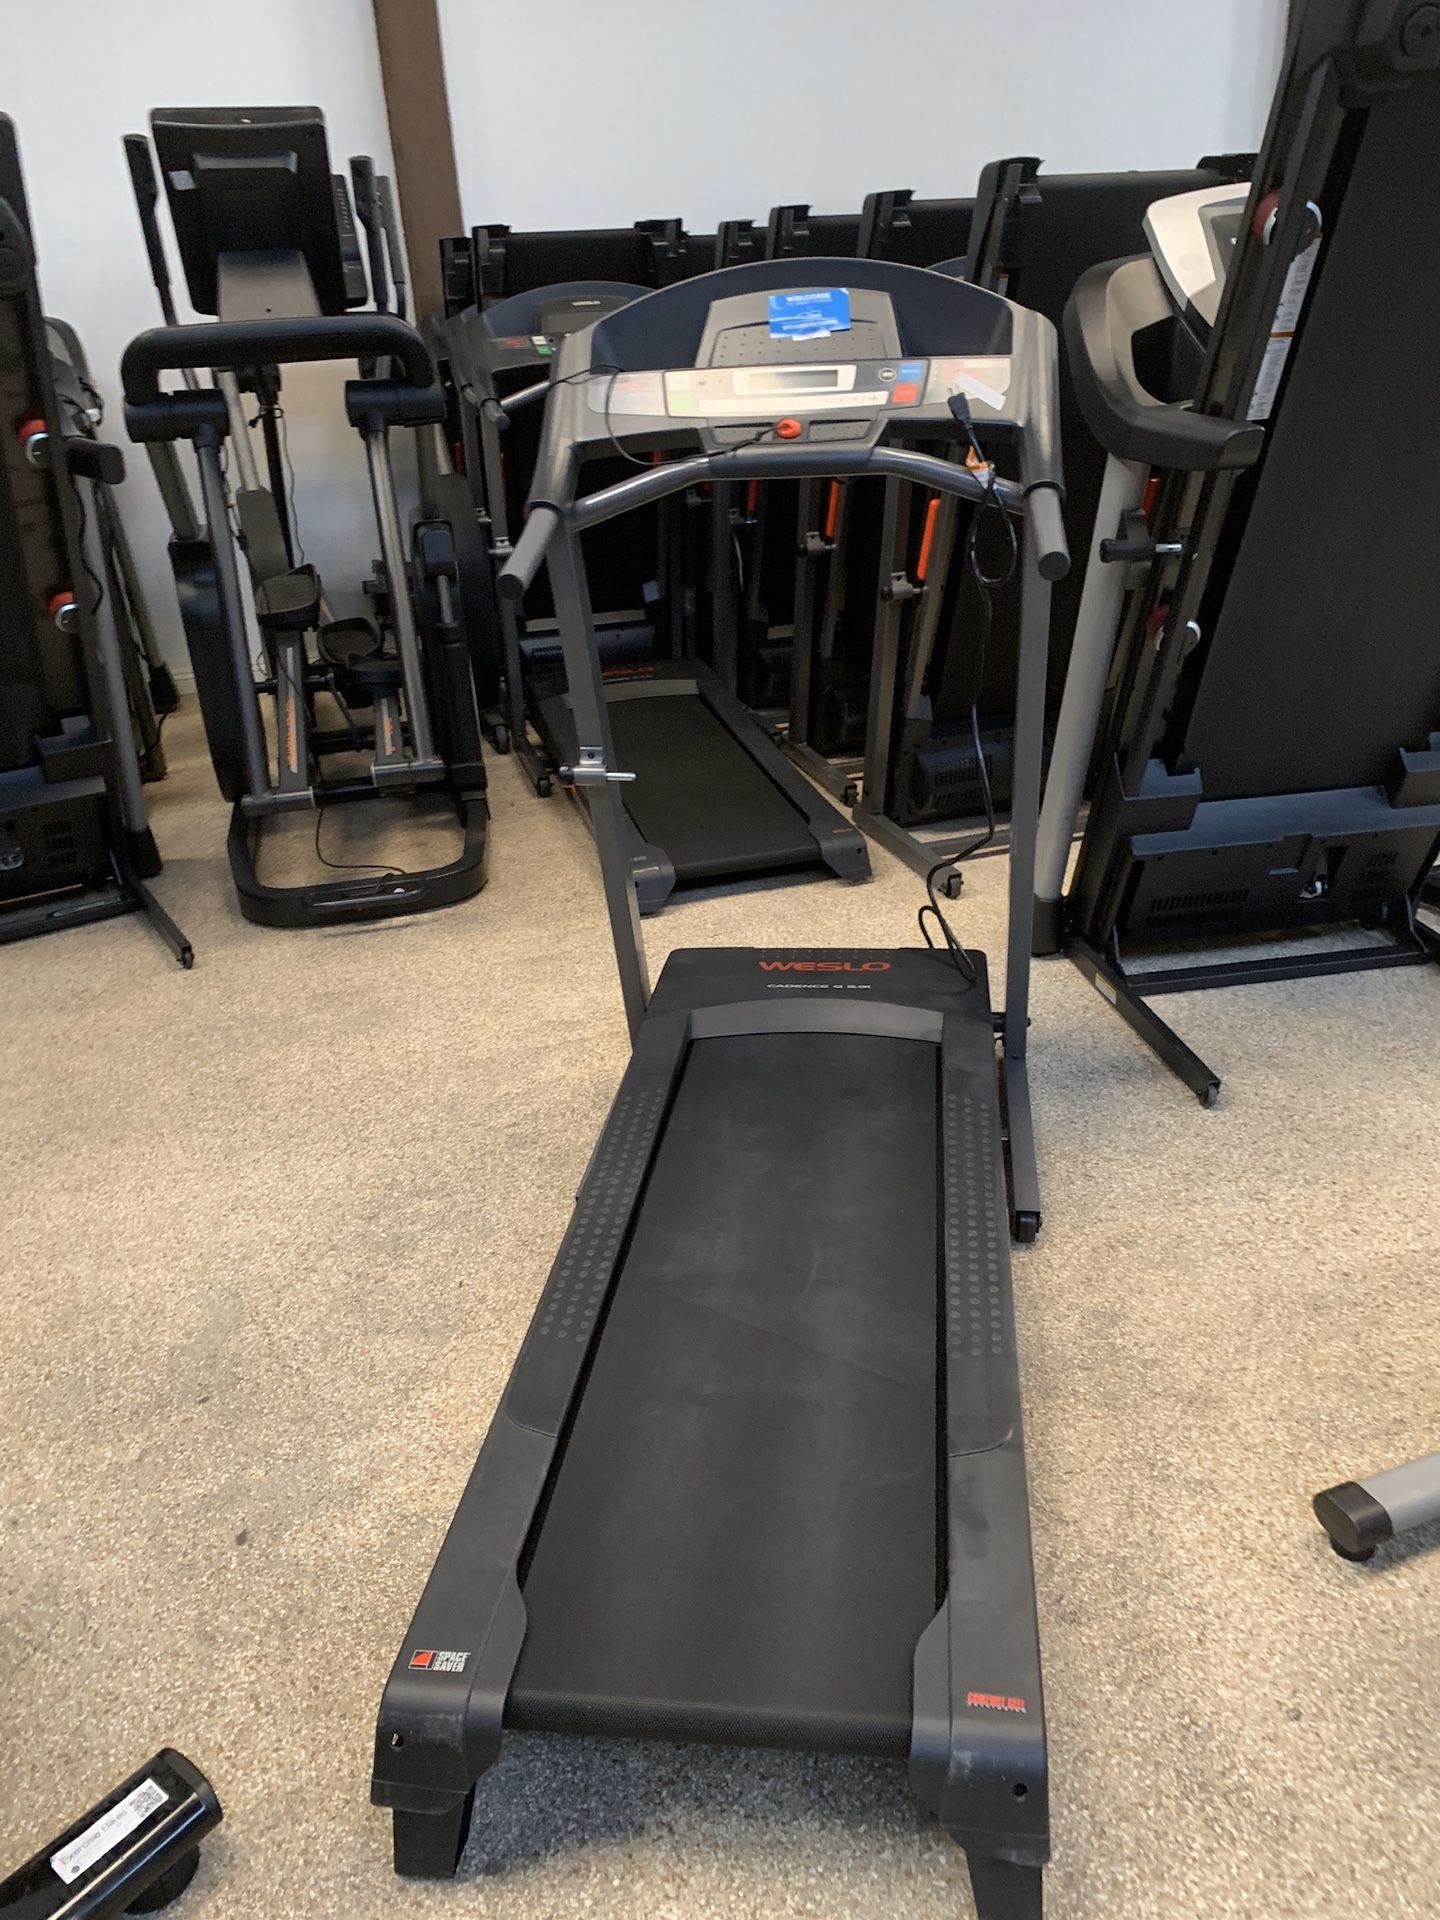 NEW (never owned) fold up treadmills with warranty!